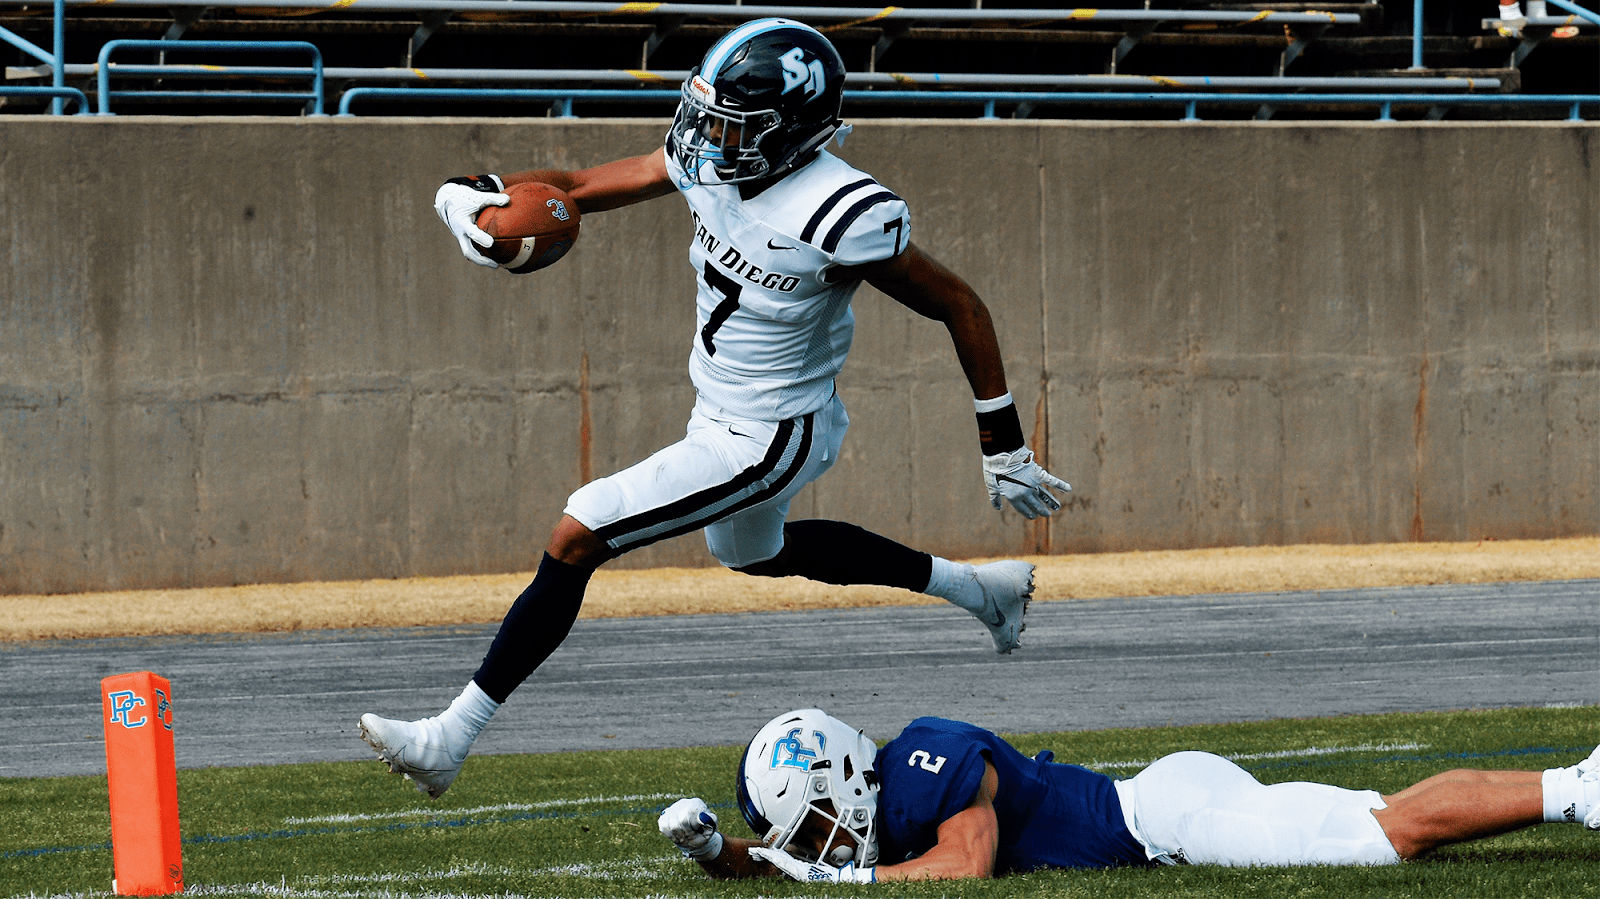 Amir Wallace is a speedy corner for University of San Diego. He recently sat down with NFL Draft Diamonds writer Jimmy Williams.